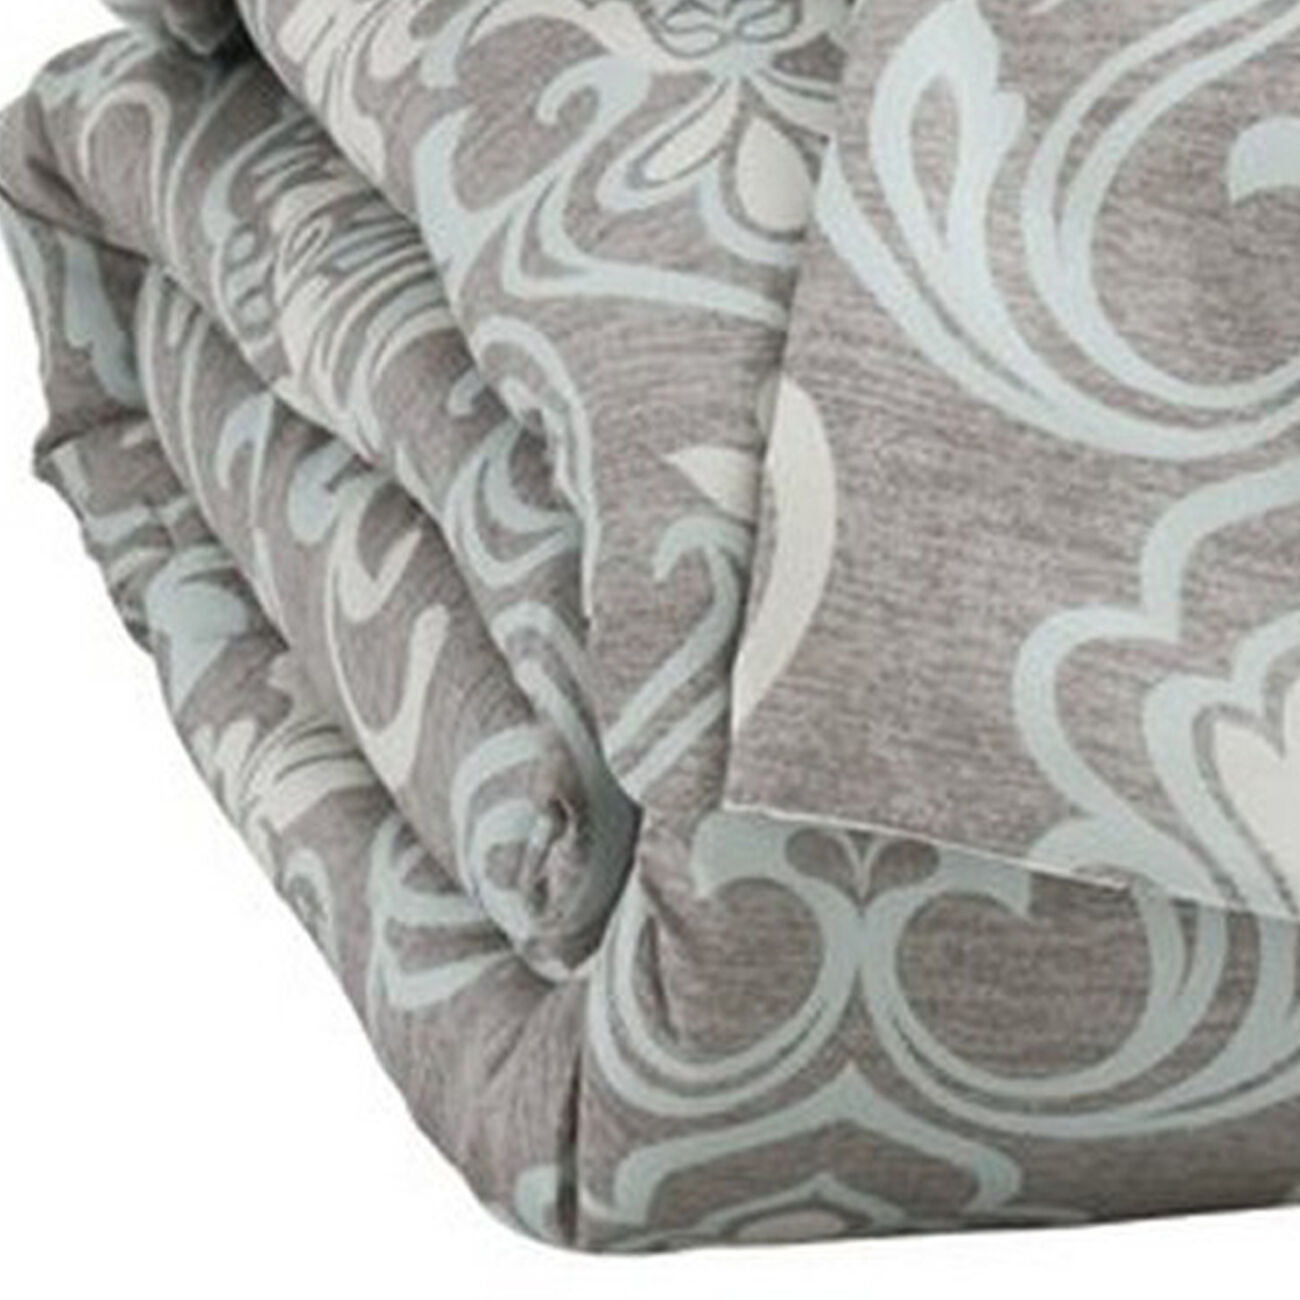 Fabric King Size Quilt Set with Scroll Floral Motifs and 2 Shams, Gray